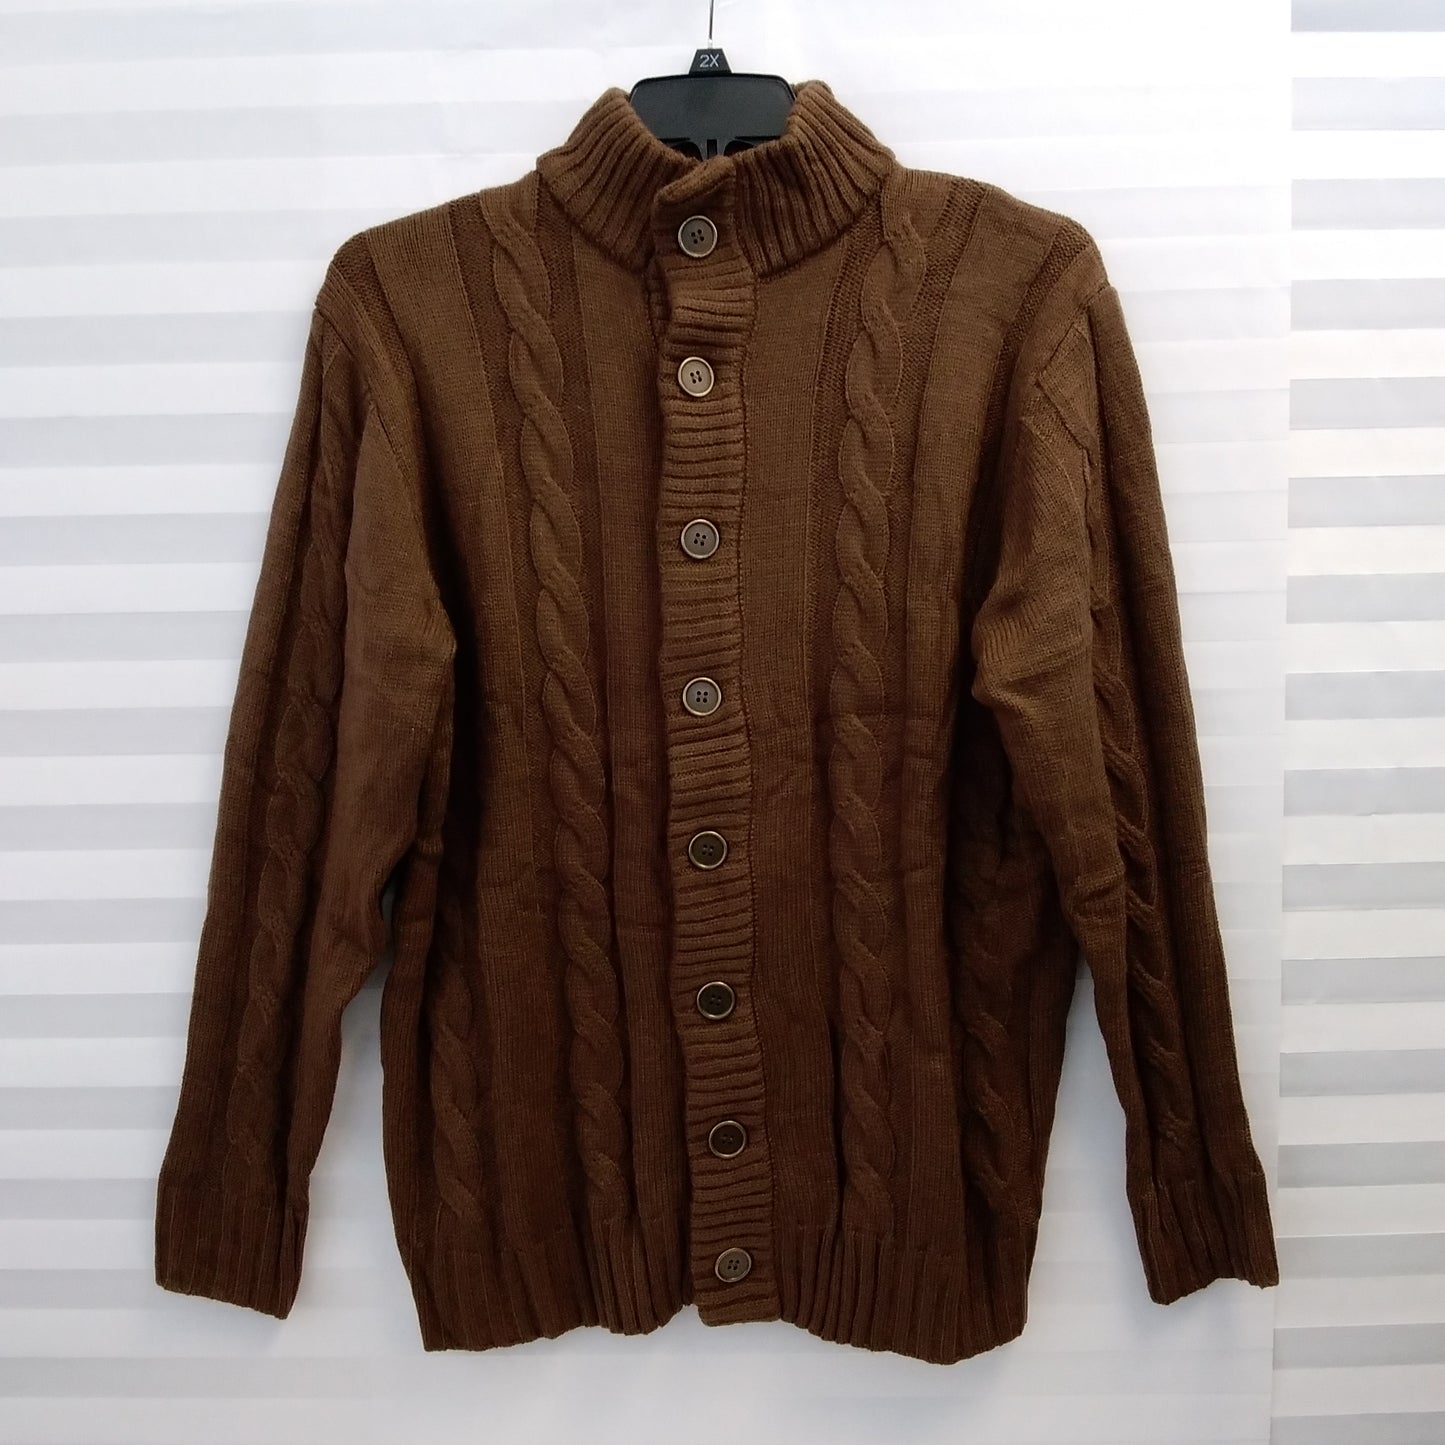 Paul Jones brown Stand Collar Cable Knit Cardigan Sweater - L